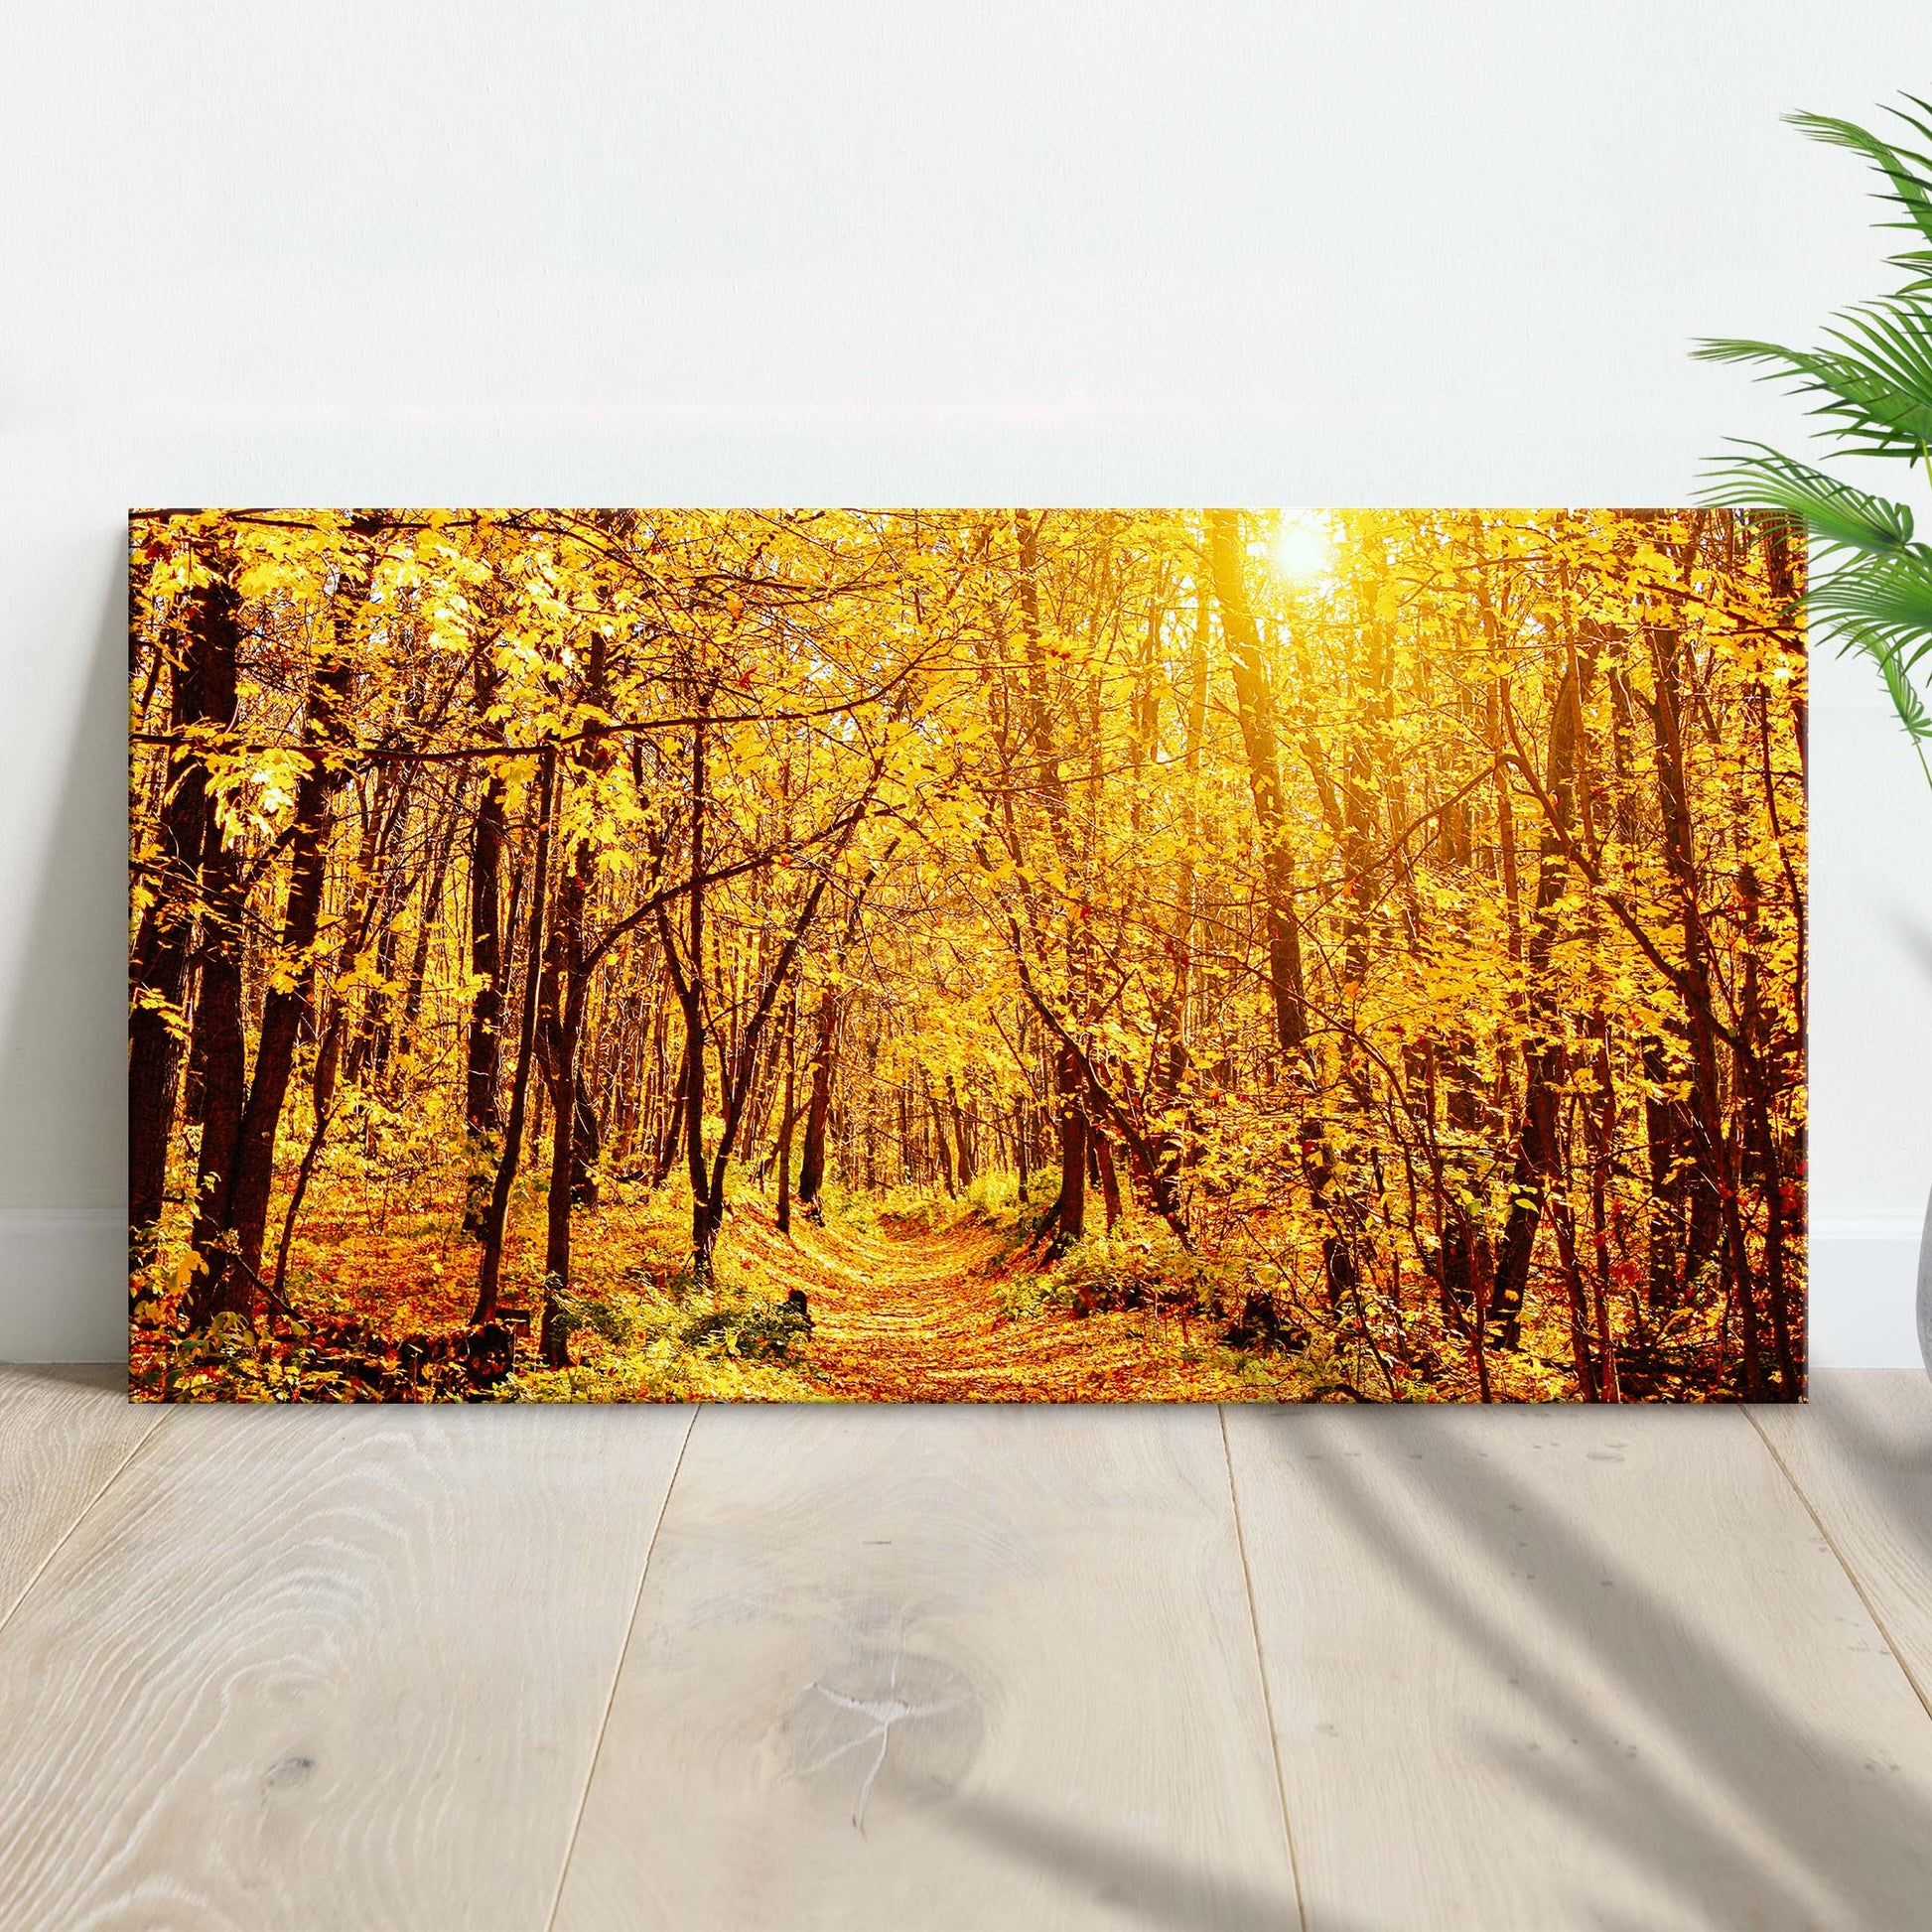 Yellow Autumn Forest Canvas Wall Art - Image by Tailored Canvases